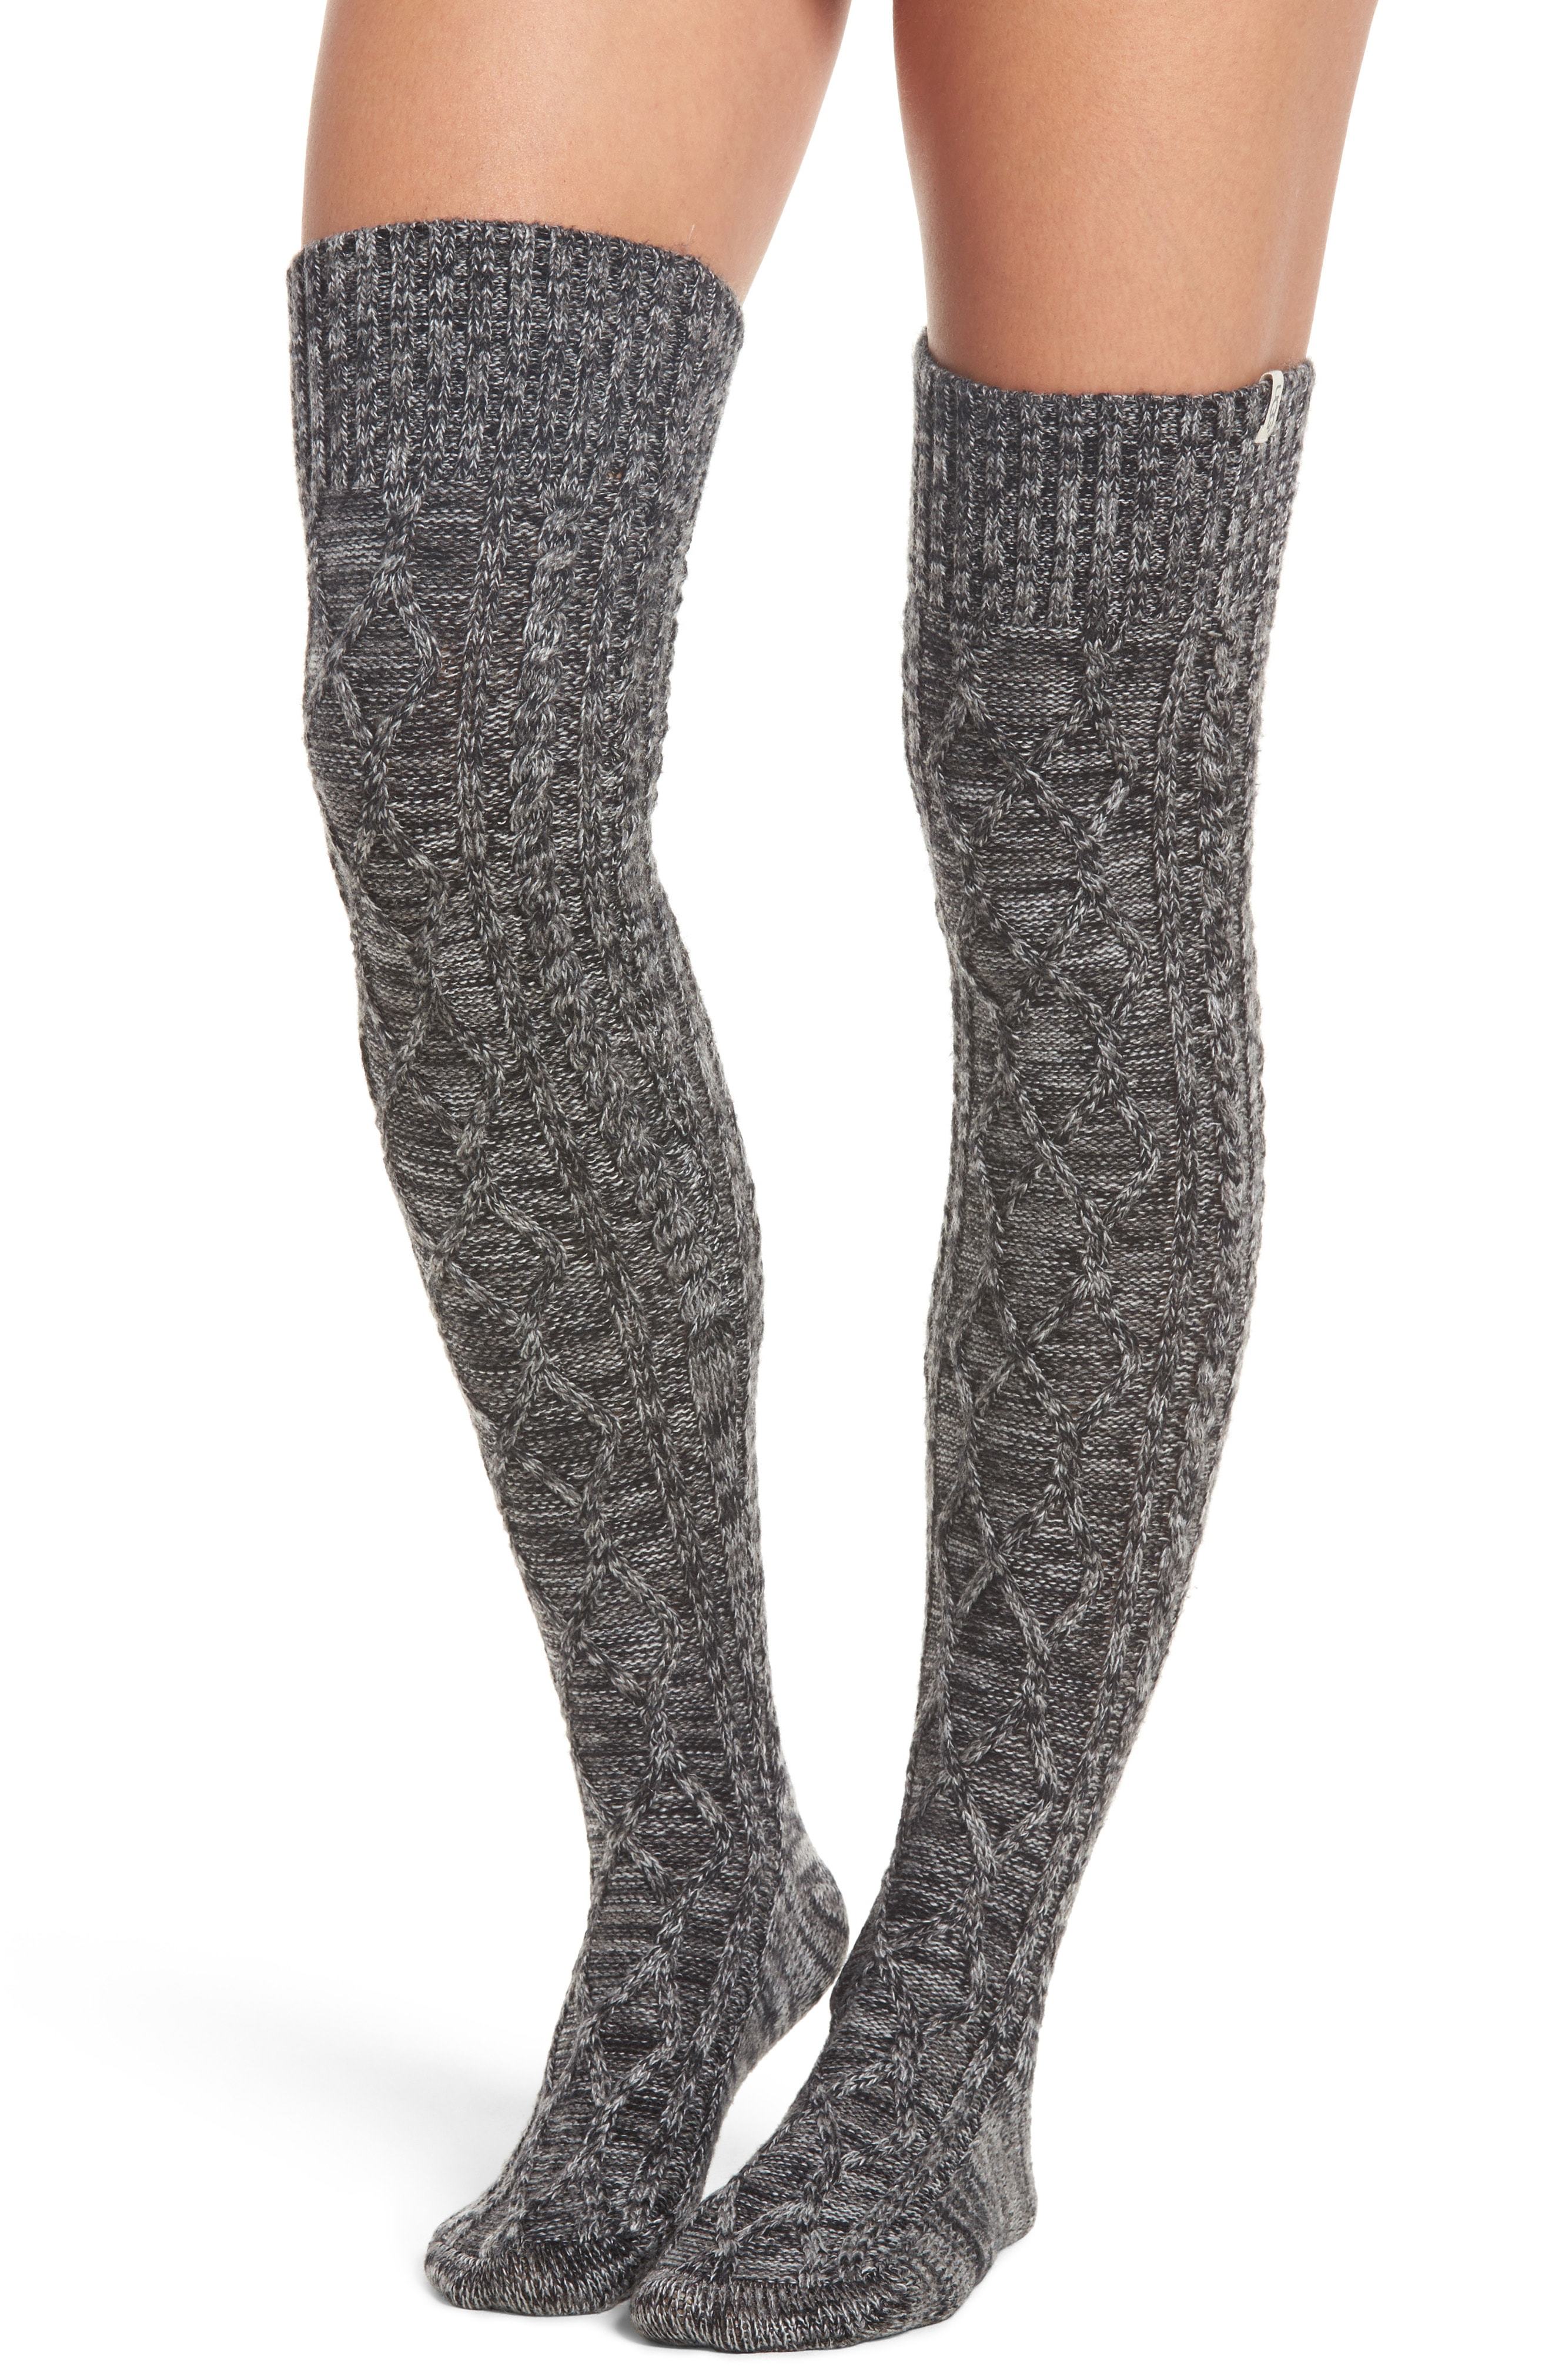 ugg over the knee cable knit boots